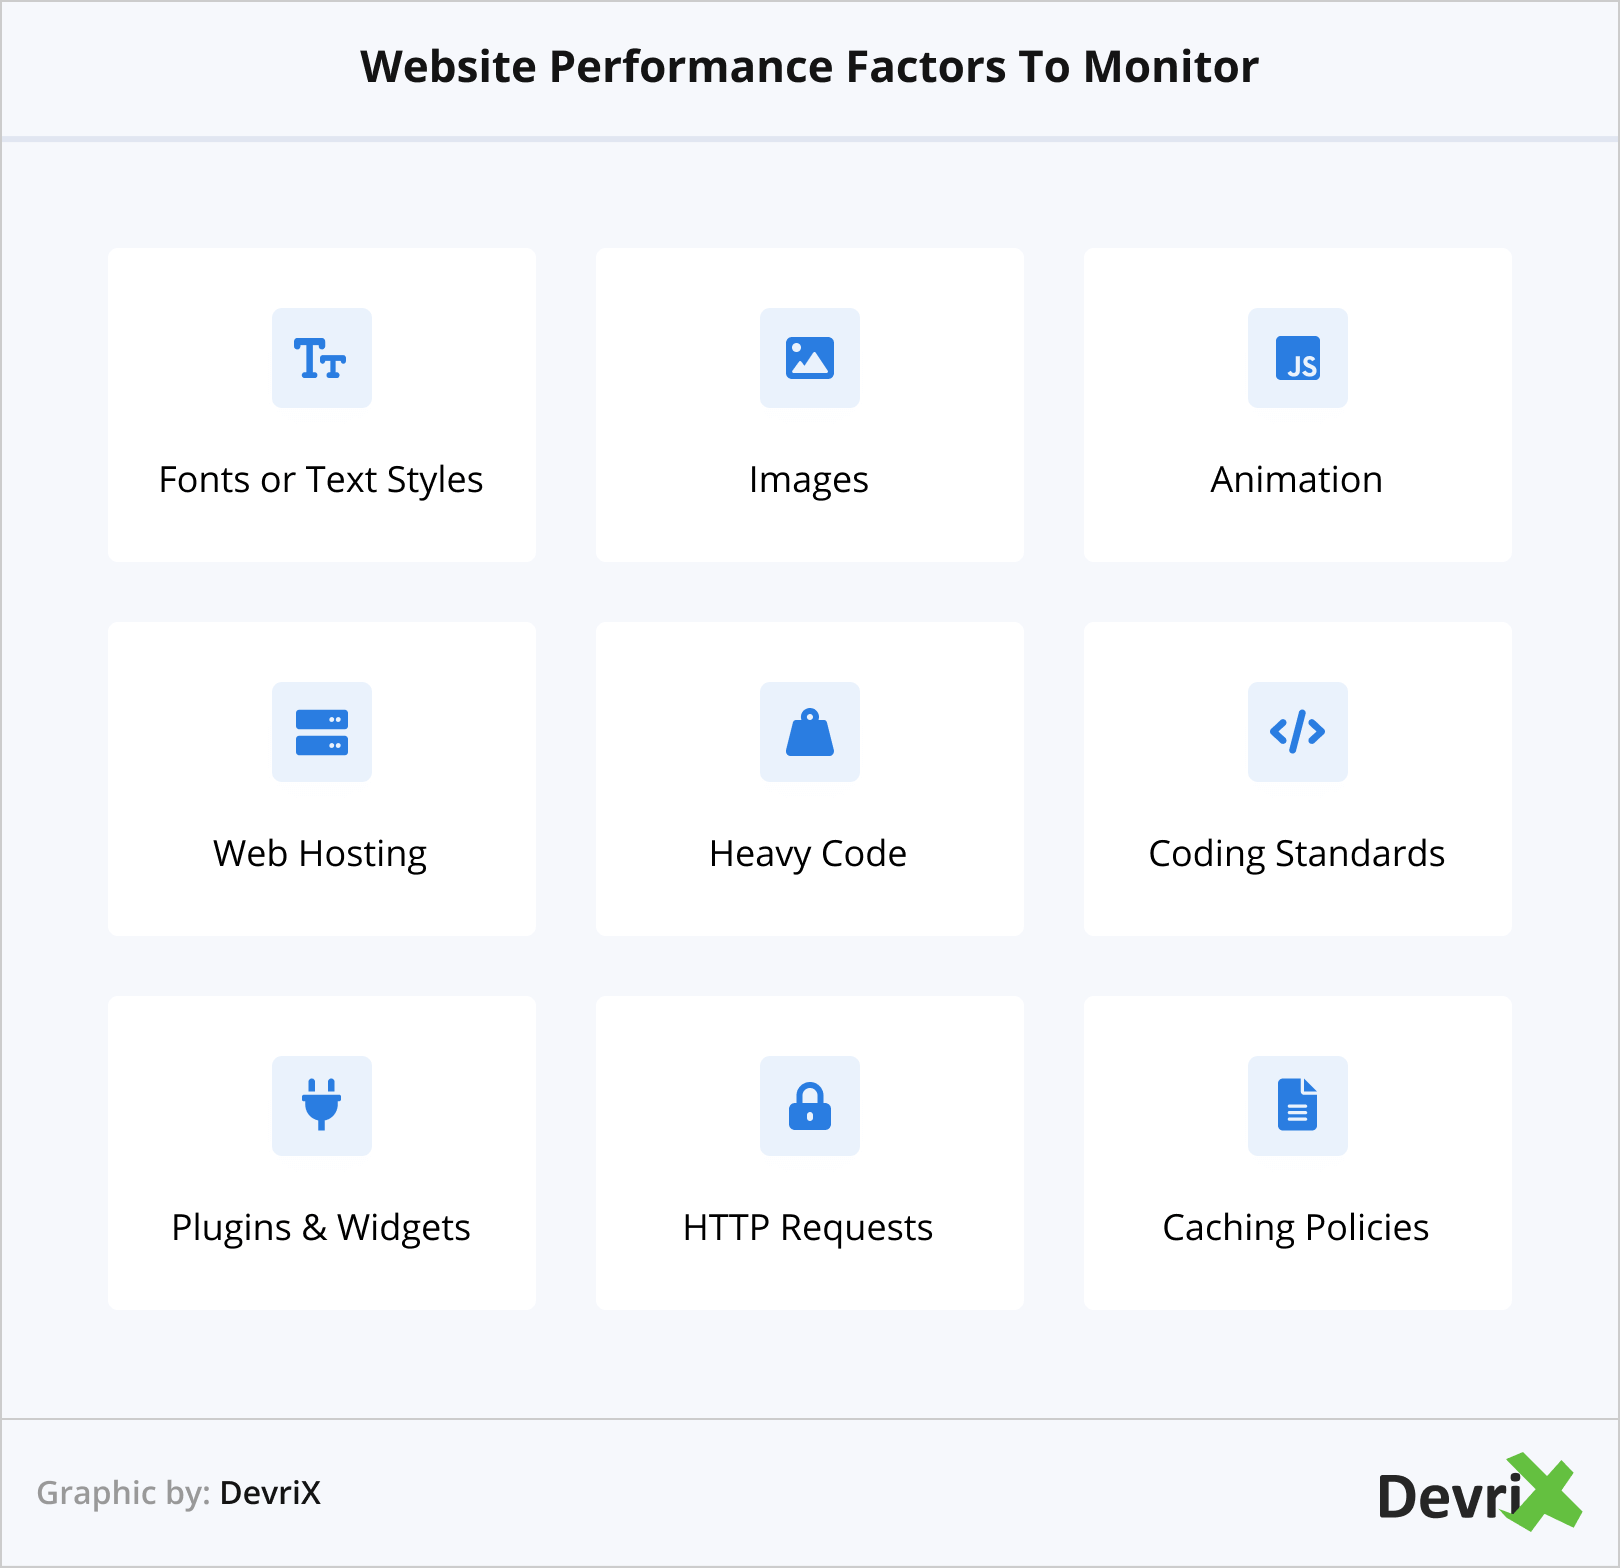 Website Performance Factors To Monitor